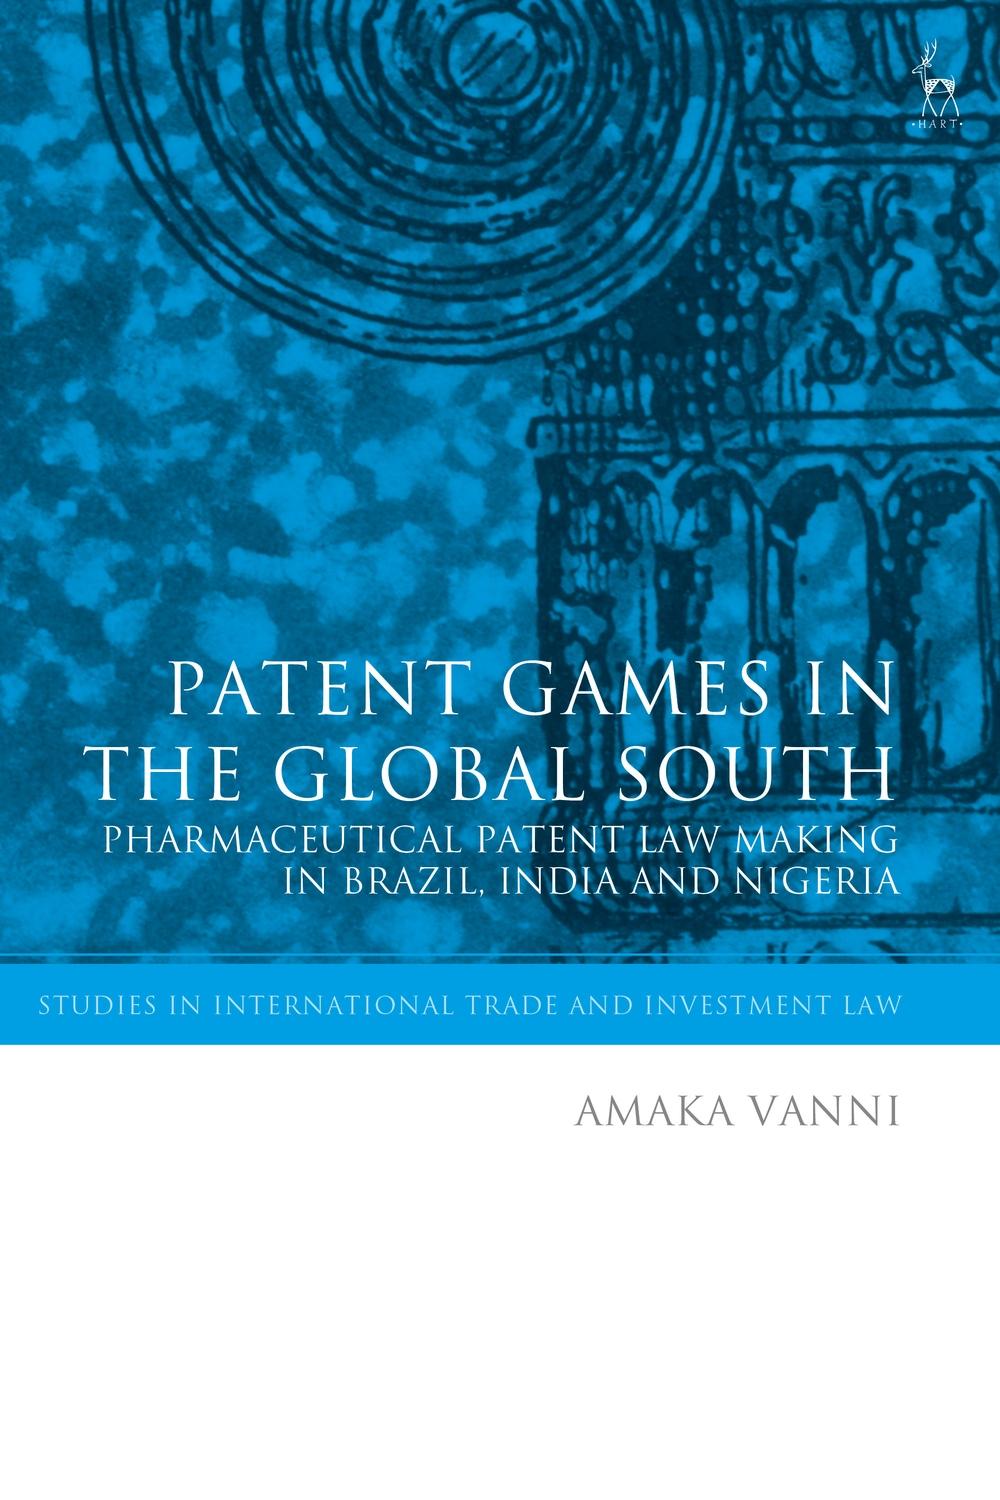 Patent Games in the Global South - Amaka Vanni